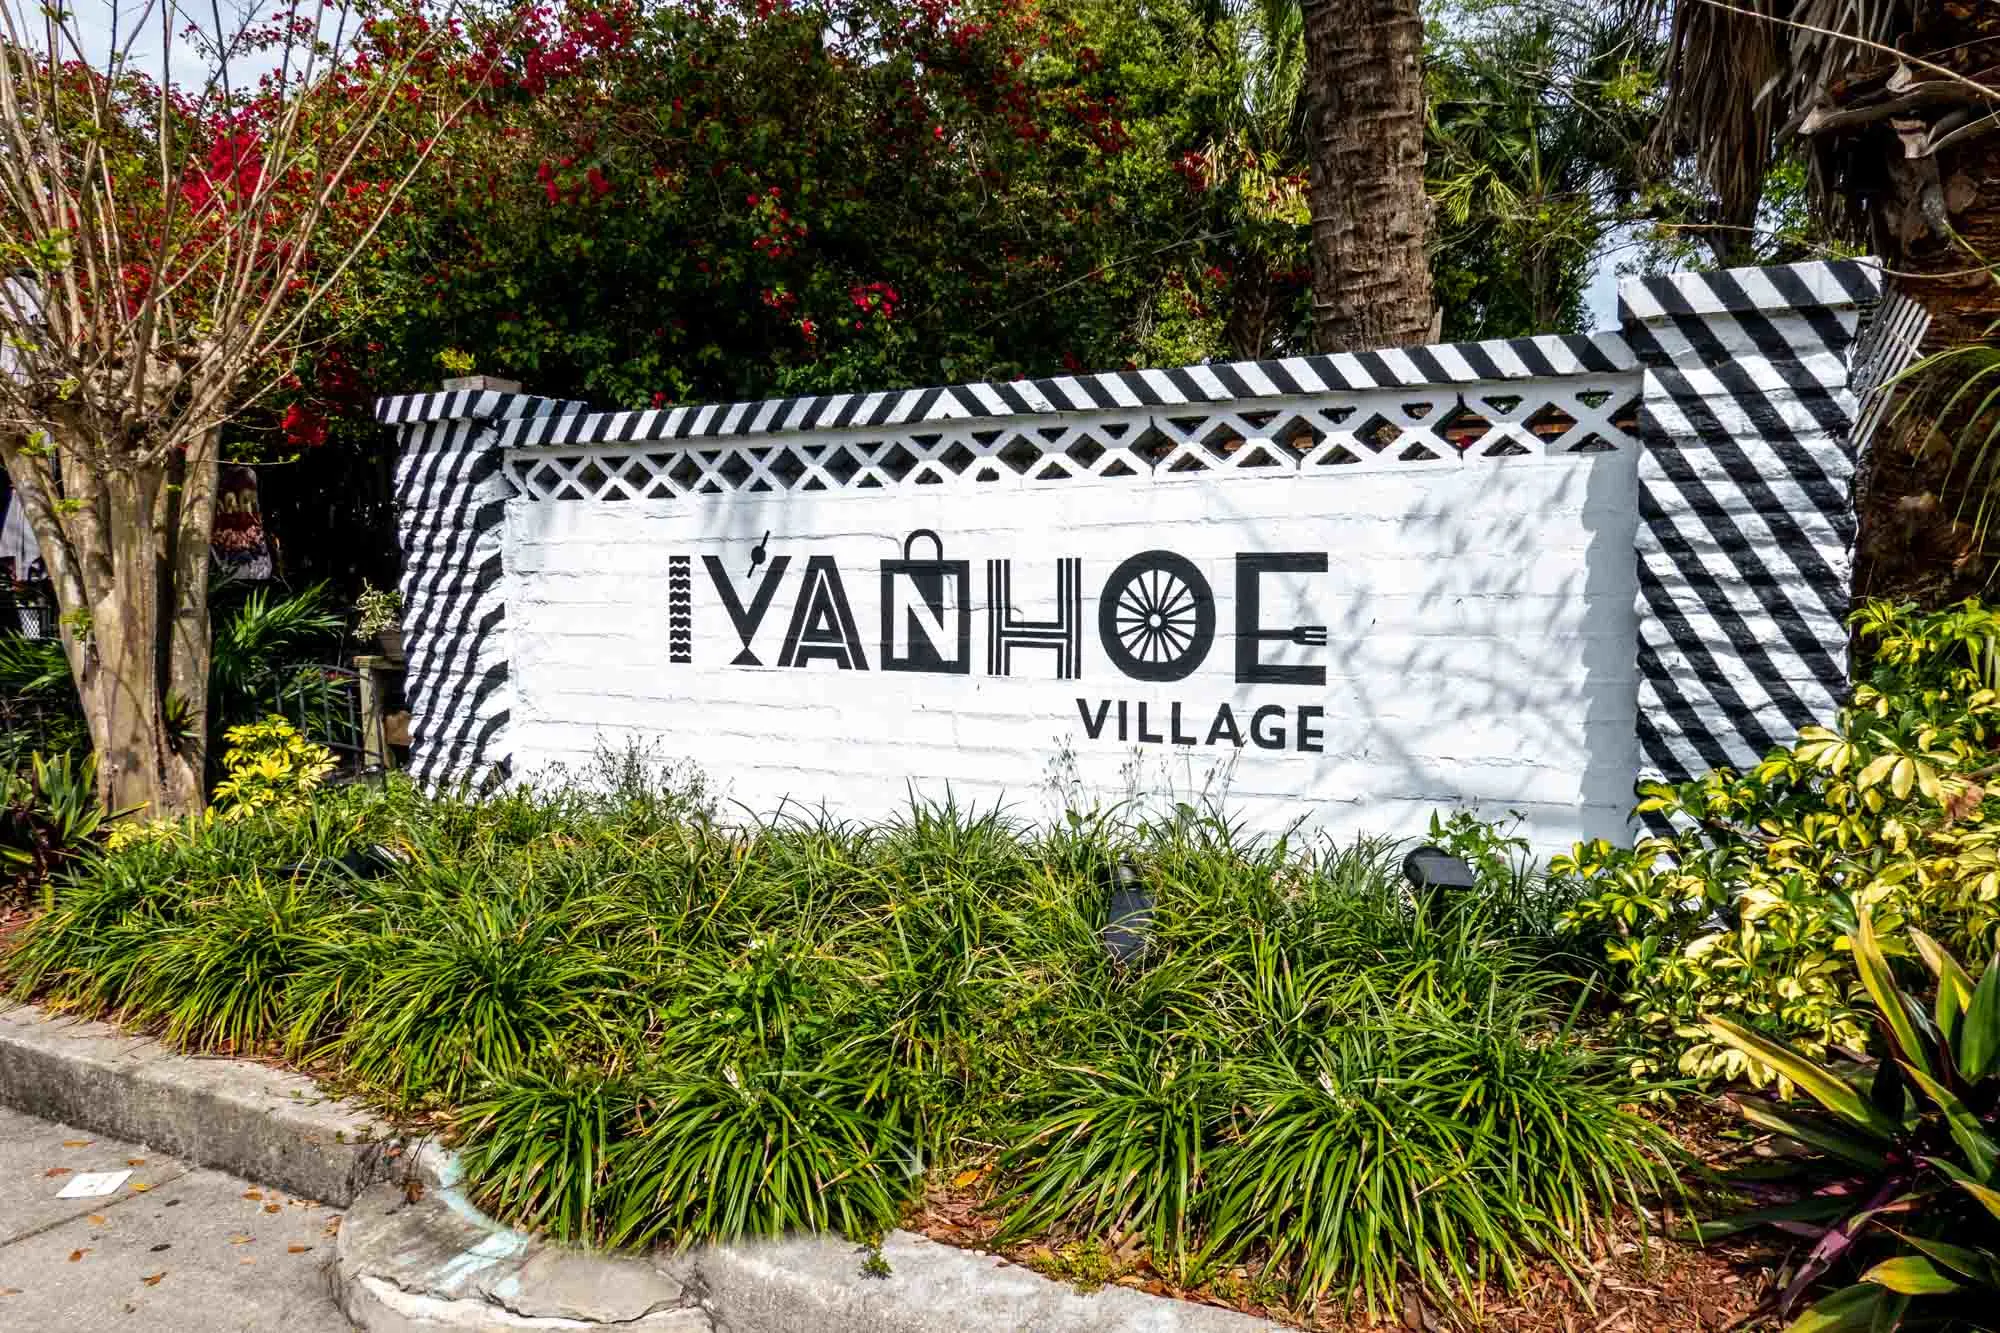 Black and white brick wall painted with a sign for "Ivanhoe Village."